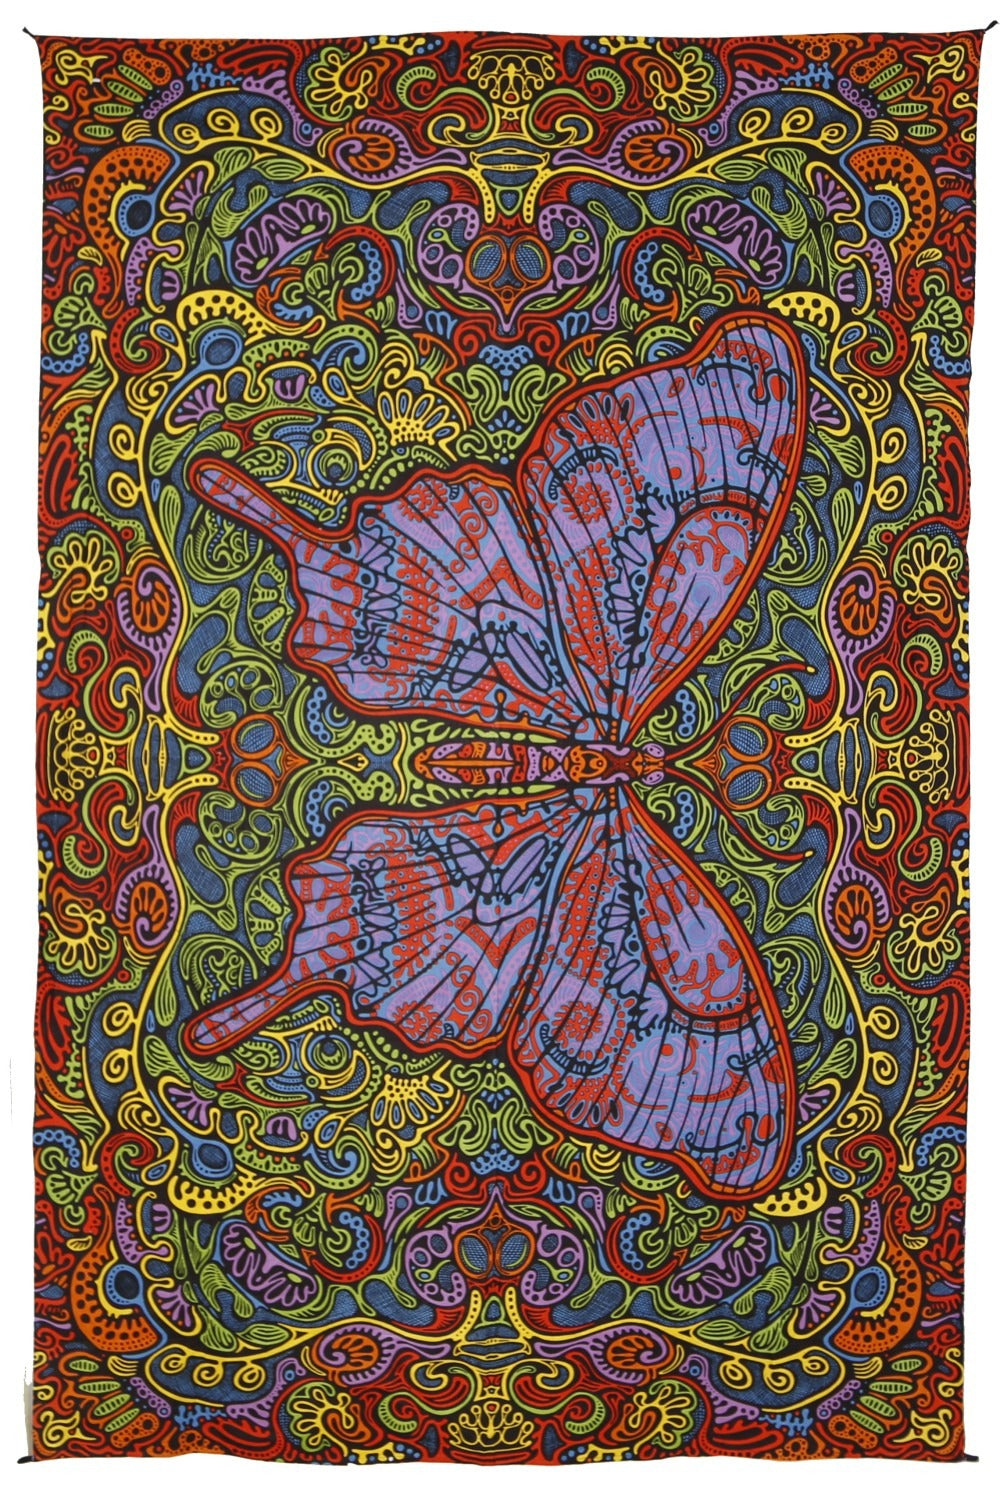 3D Butterfly Daydream Tapestry 90x60 Art by Chris Pinkerton - eDeadShop